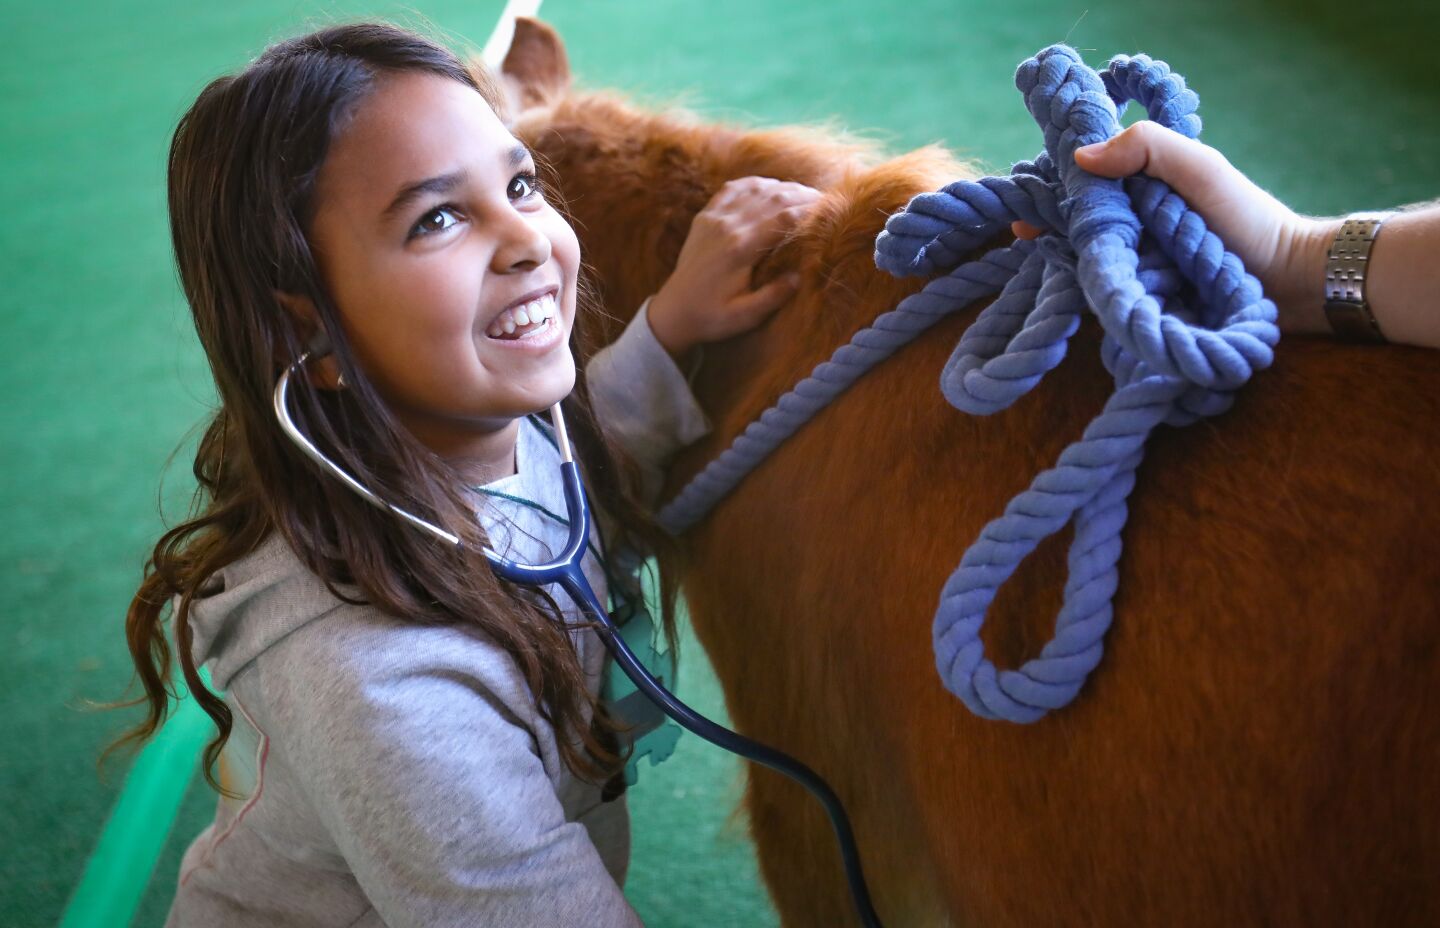 Sofia Otero, 9, uses a stethoscope to listen to the heart of Fable, a miniature horse, at the Helen Woodward Animal Center, during the one-day veterinarian camp, February 8, in Rancho Santa Fe.